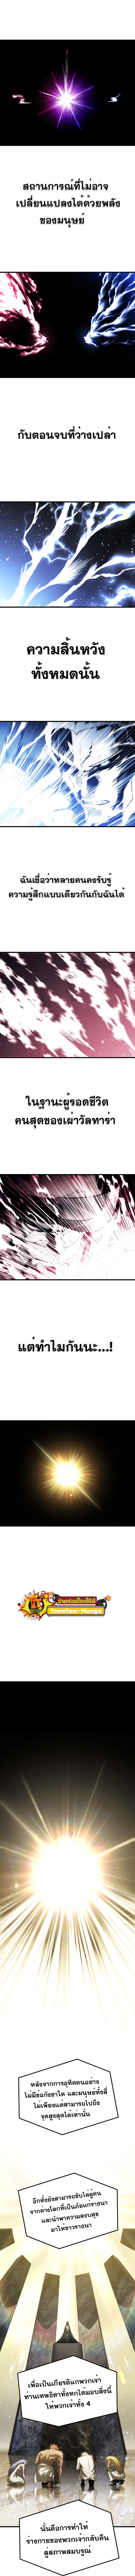 Survival Of Blade King 142 (9)